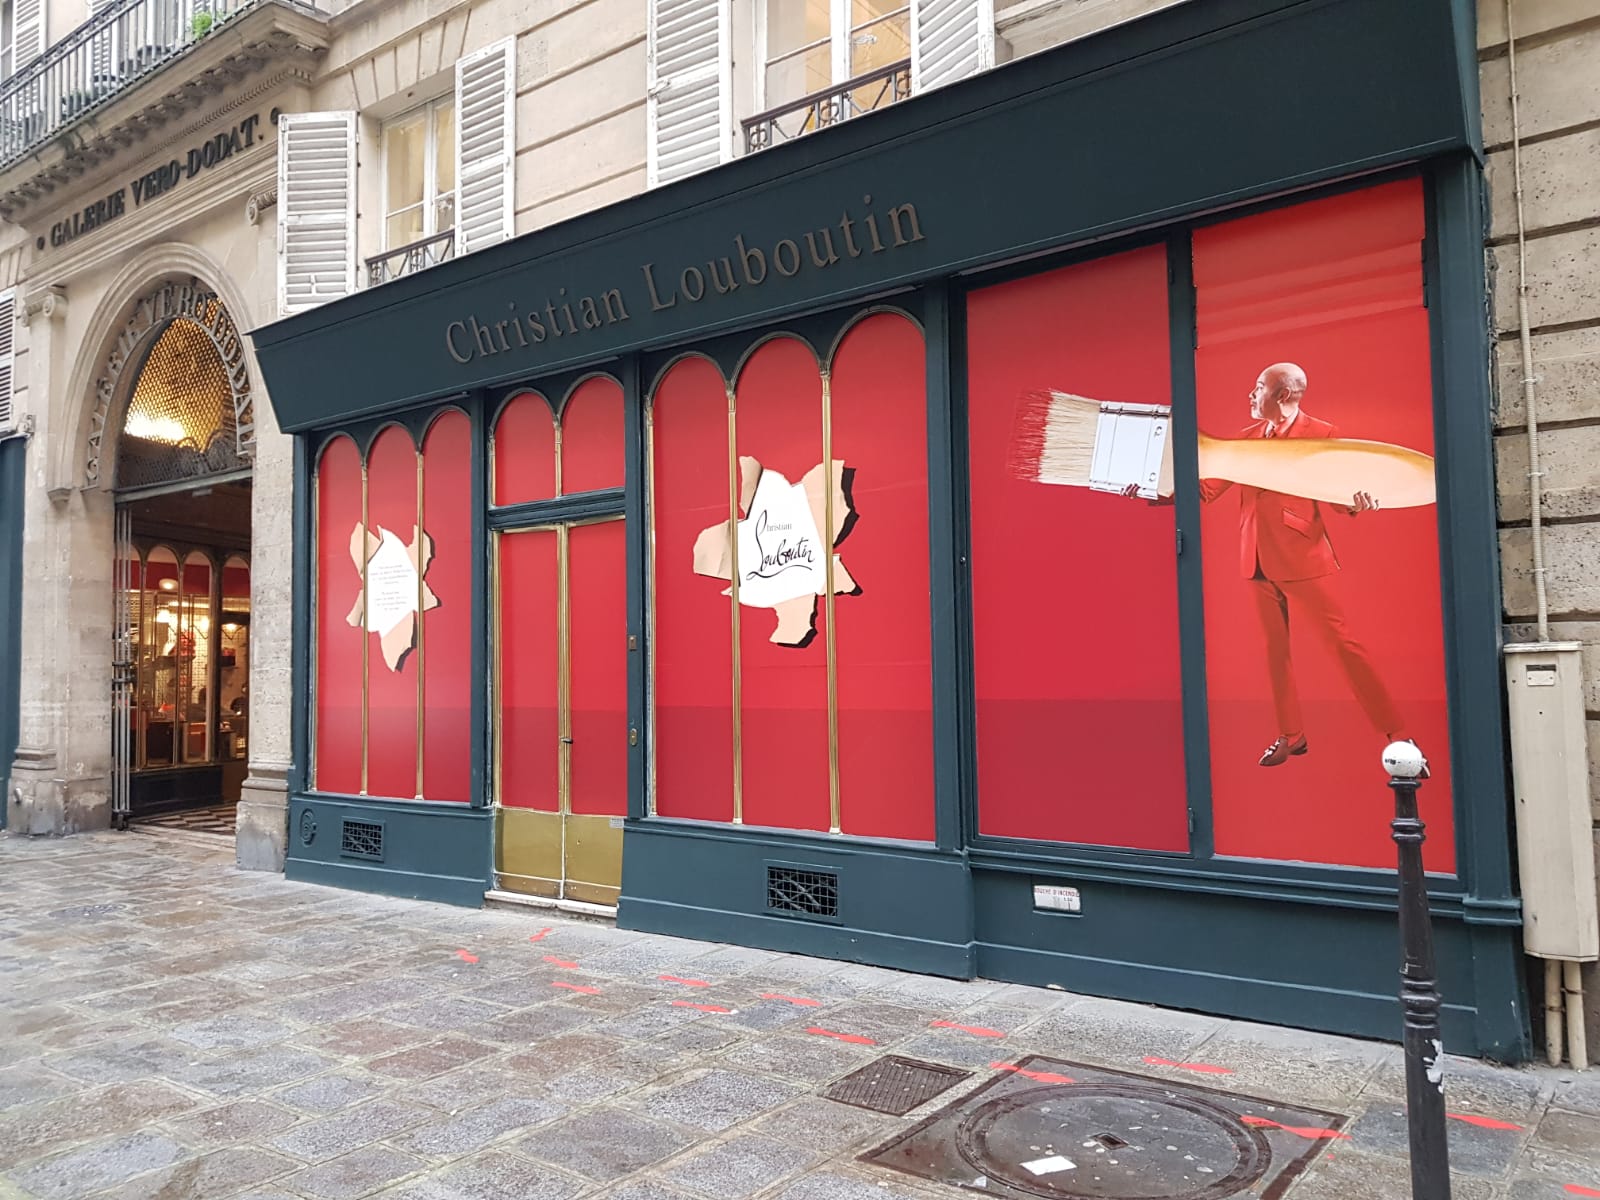 Christian-louboutin-clean-tag-tapage-medias-street-guerilla-marketing-campagne-publicitaire